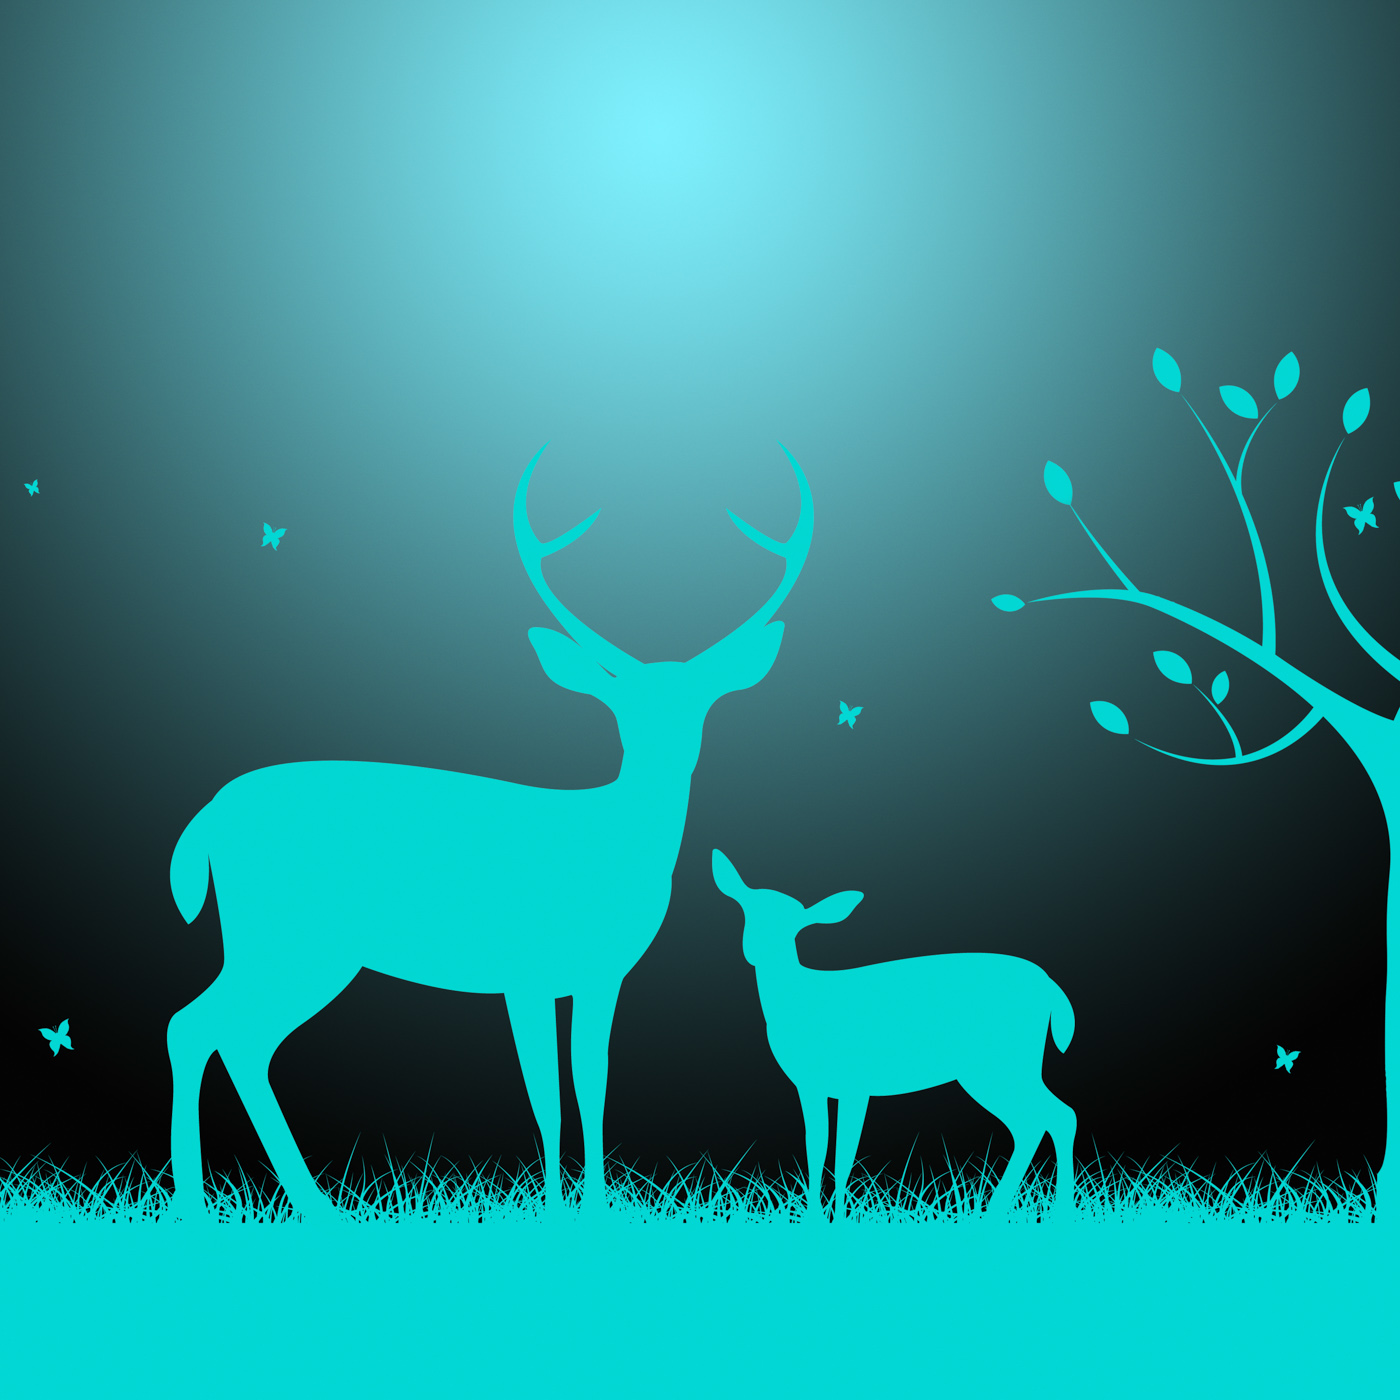 Deer wildlife indicates night time and darkness photo